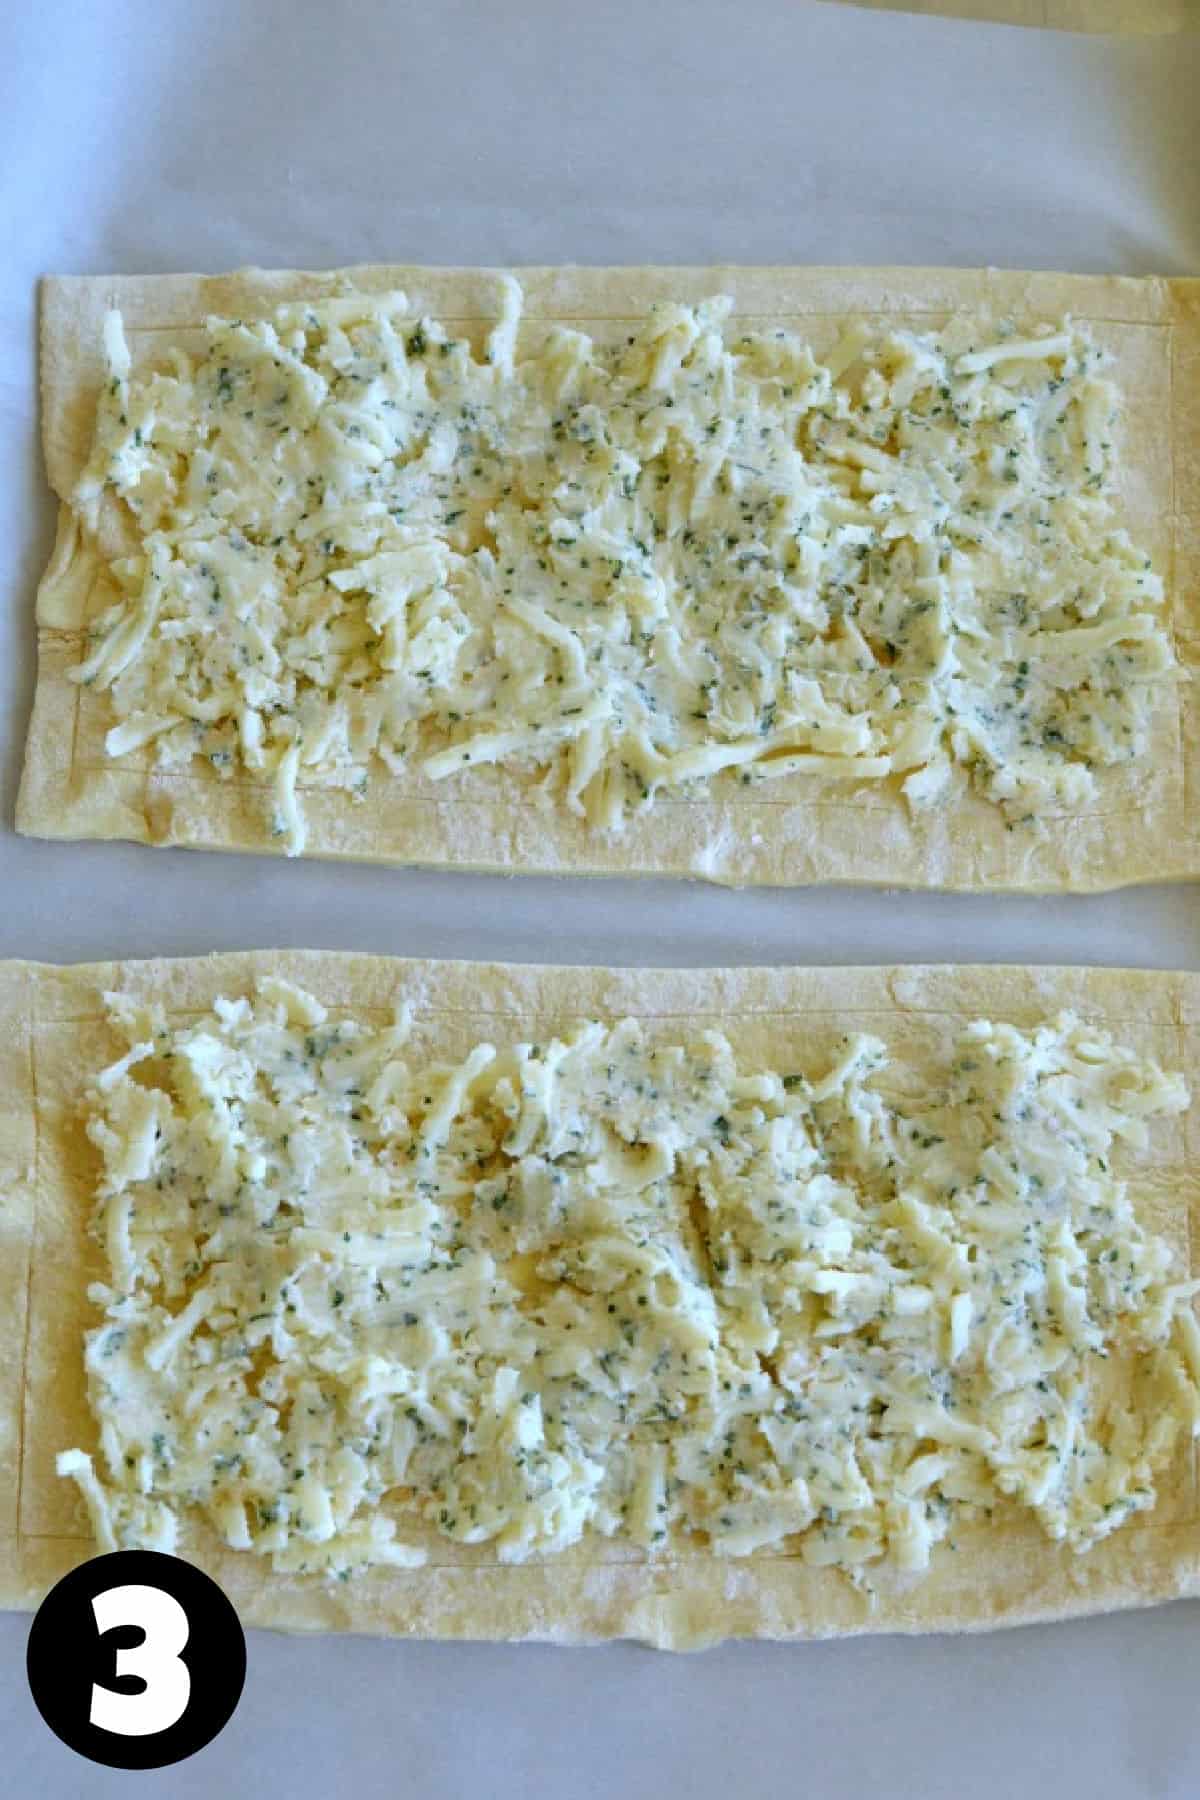 Puff pastry sheets with garlic herb butter and mozzarella cheese spread over it.